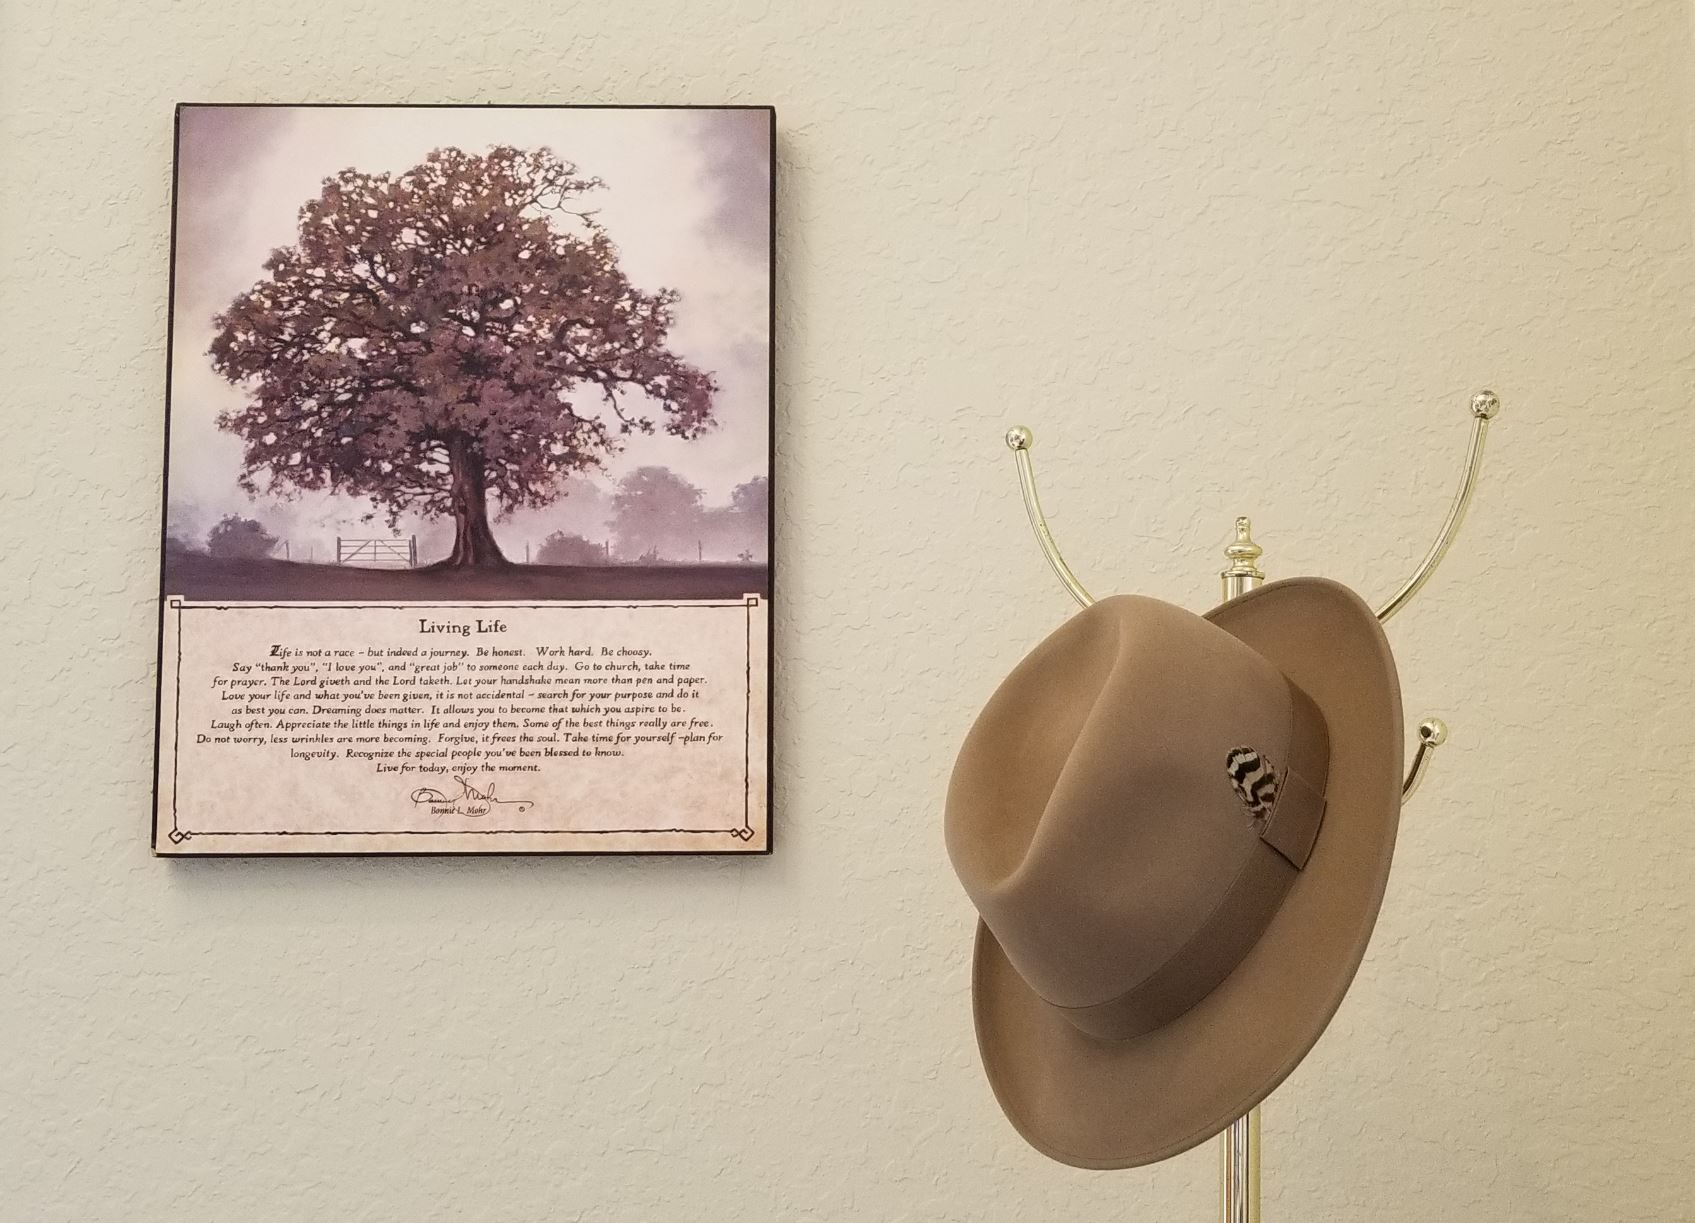 My Church put up a hat rack today March 24 2019.JPG